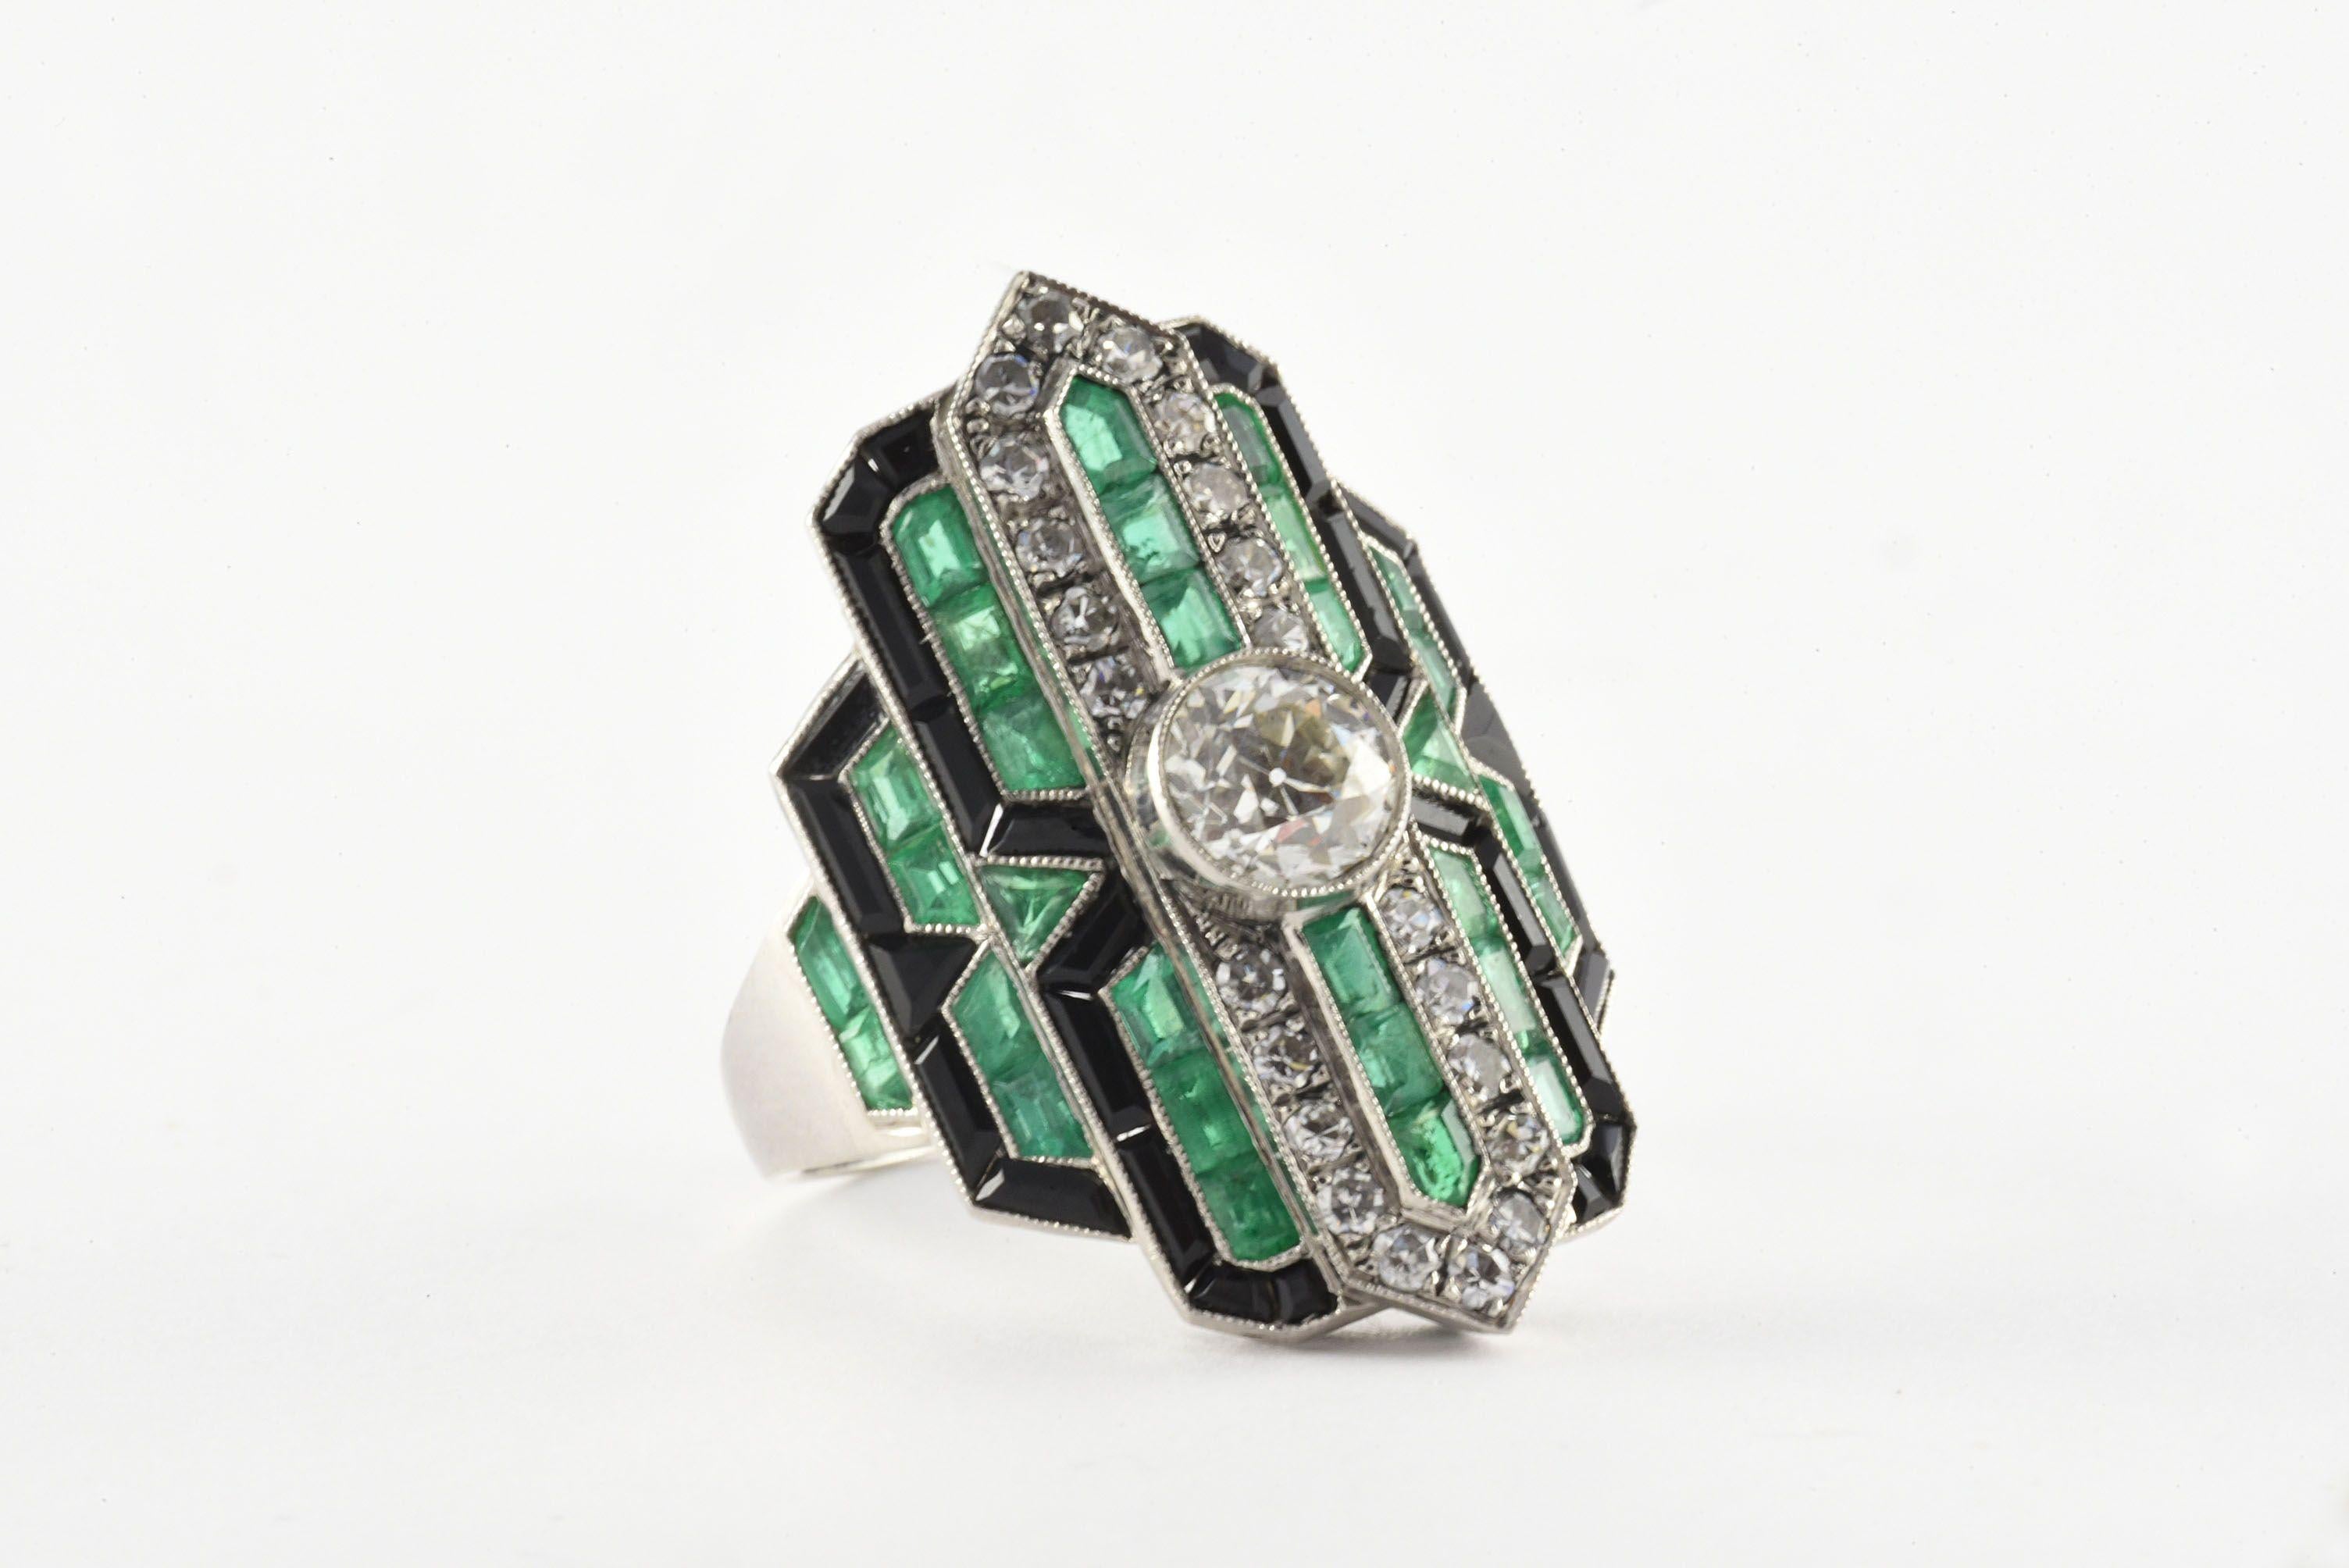 This stunning, geometric Art Deco ring set in platinum is designed around an Old European cut diamond center stone measuring 0.77 carats, F-G color, VS clarity, embellished with twenty-two single cut diamonds totaling 0.50 carats, F-G color, VS-SI